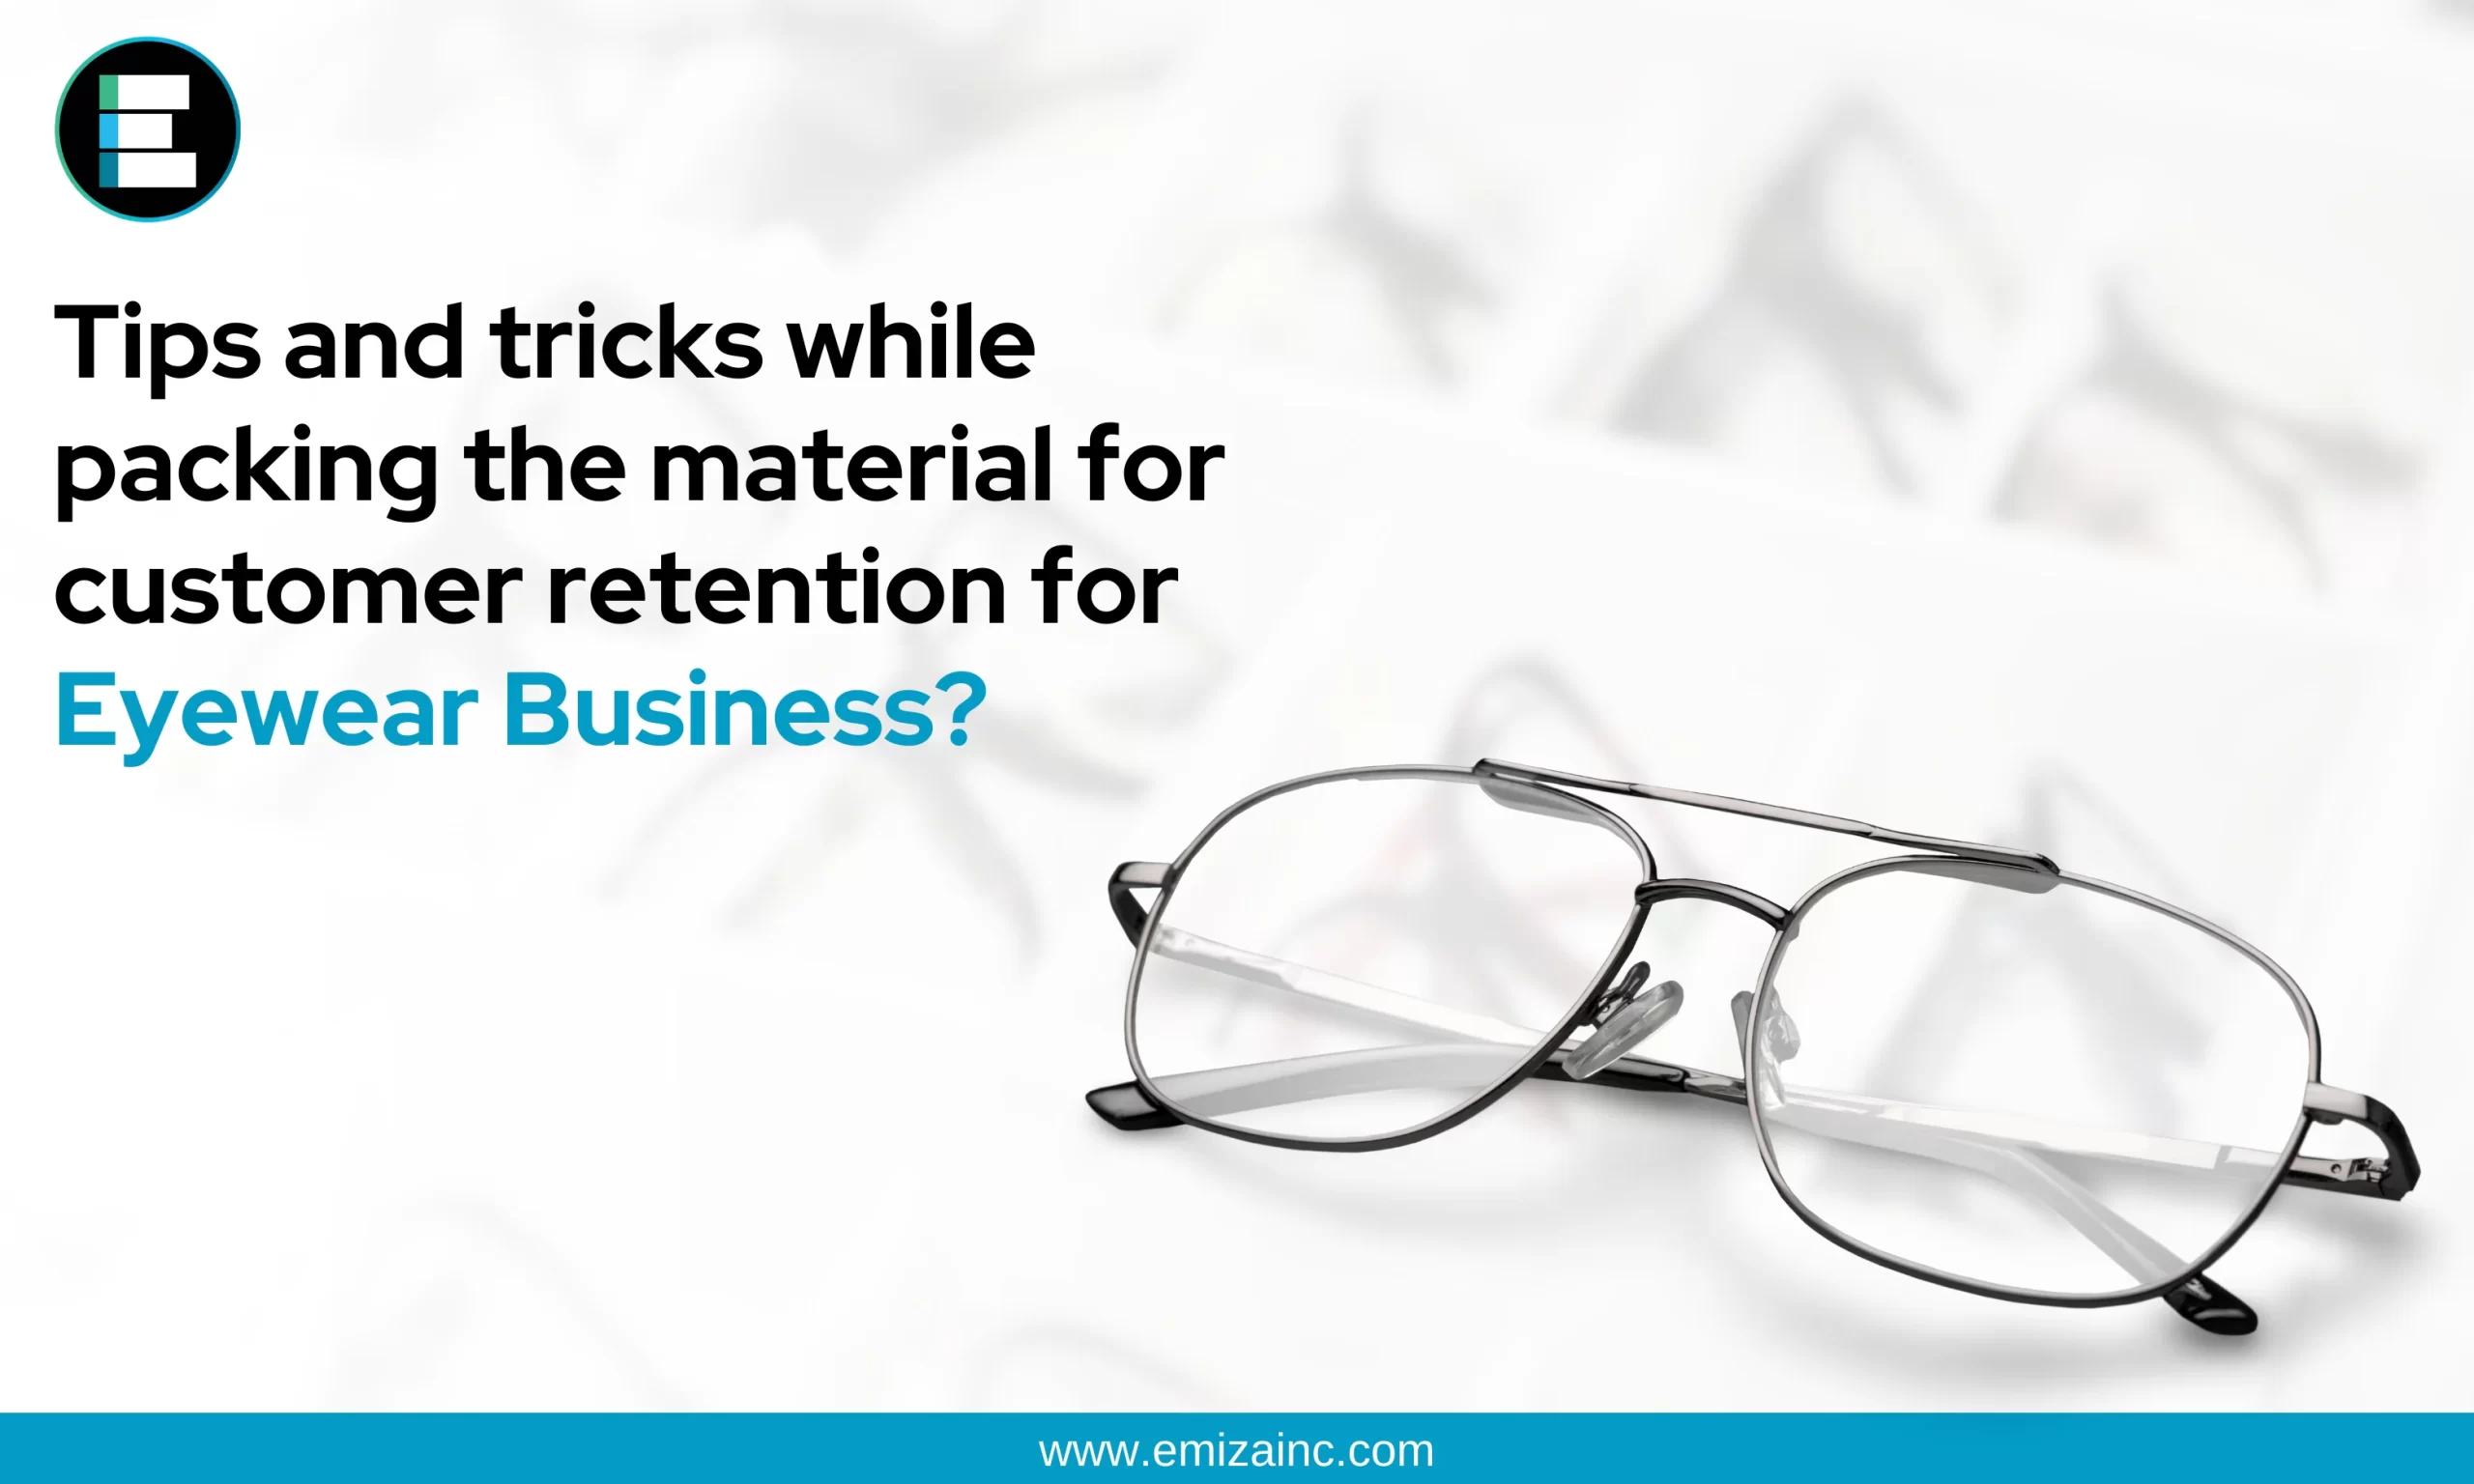 Tips and tricks while packing the material for customer retention for Eyewear business